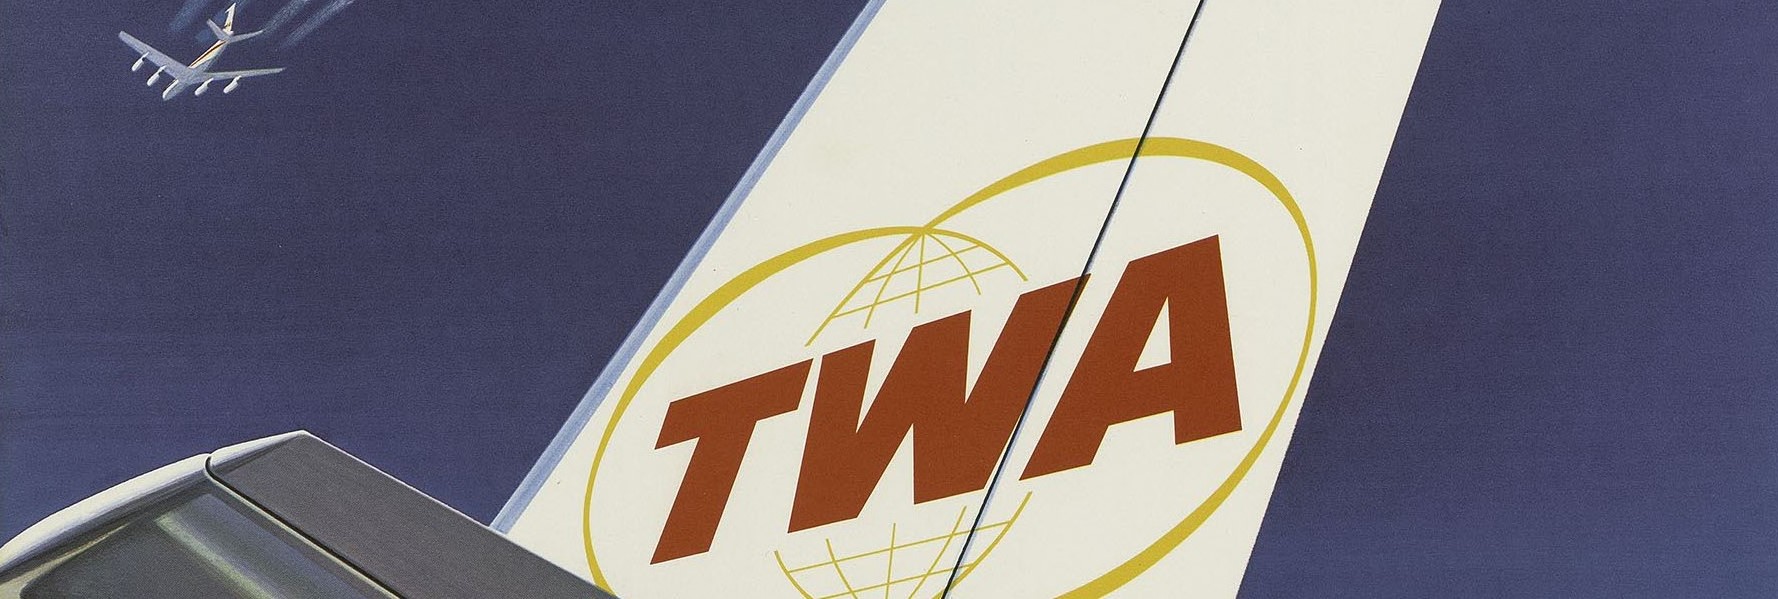 Details about   New York City 1957 Times Square TWA Airline Vintage Poster Print Travel Tourism